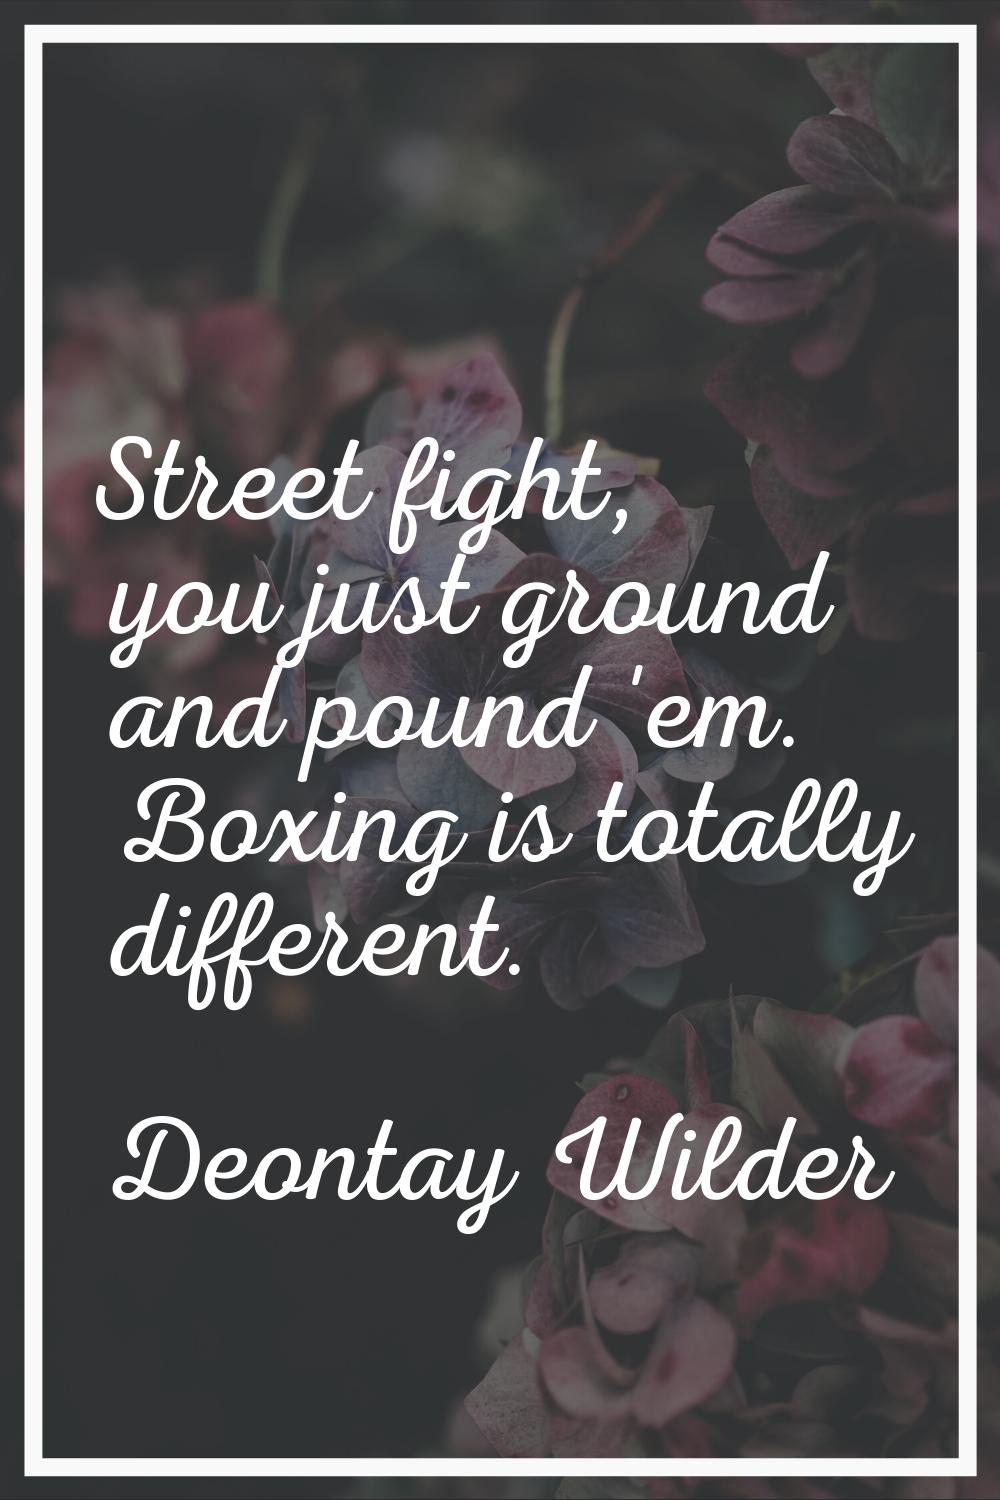 Street fight, you just ground and pound 'em. Boxing is totally different.